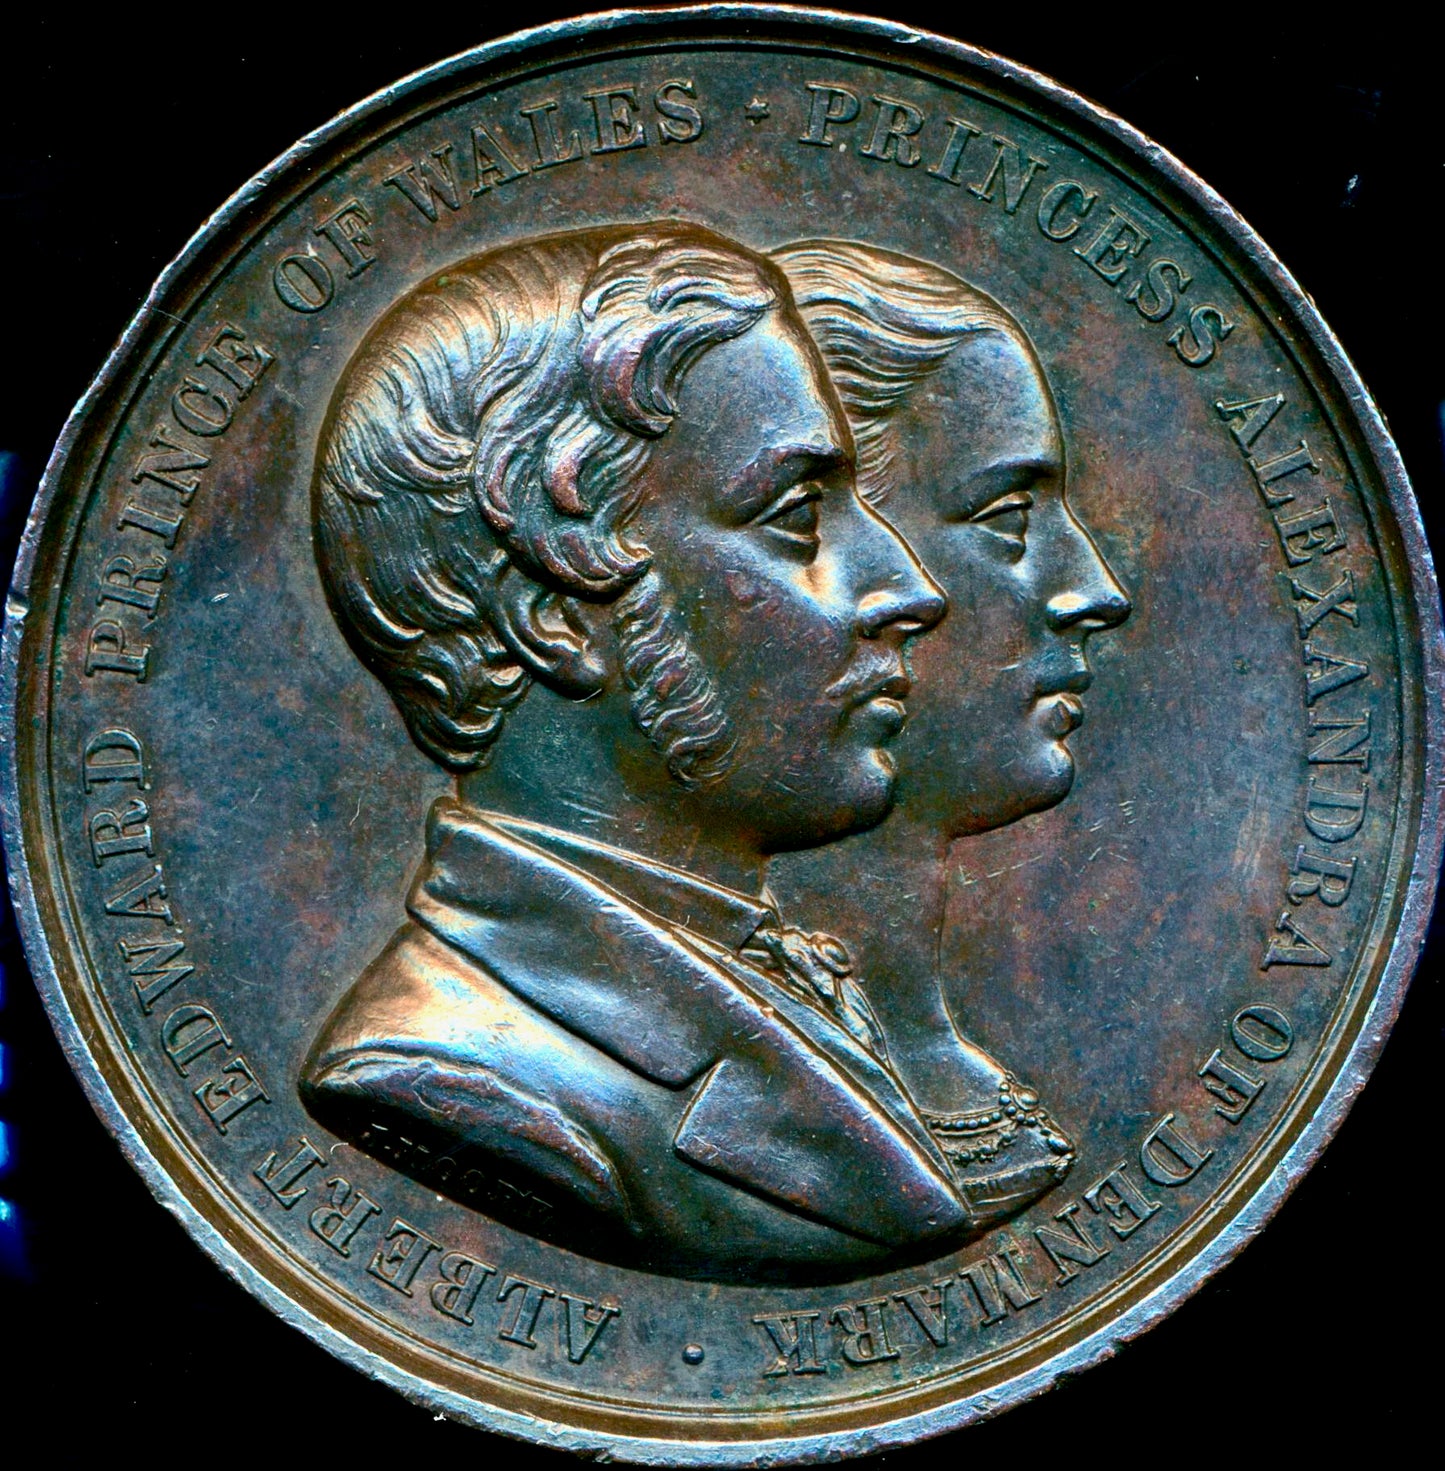 1863 Wedding of Edward and Alexandria 42mm bronze medal by J Moore BHM 2765